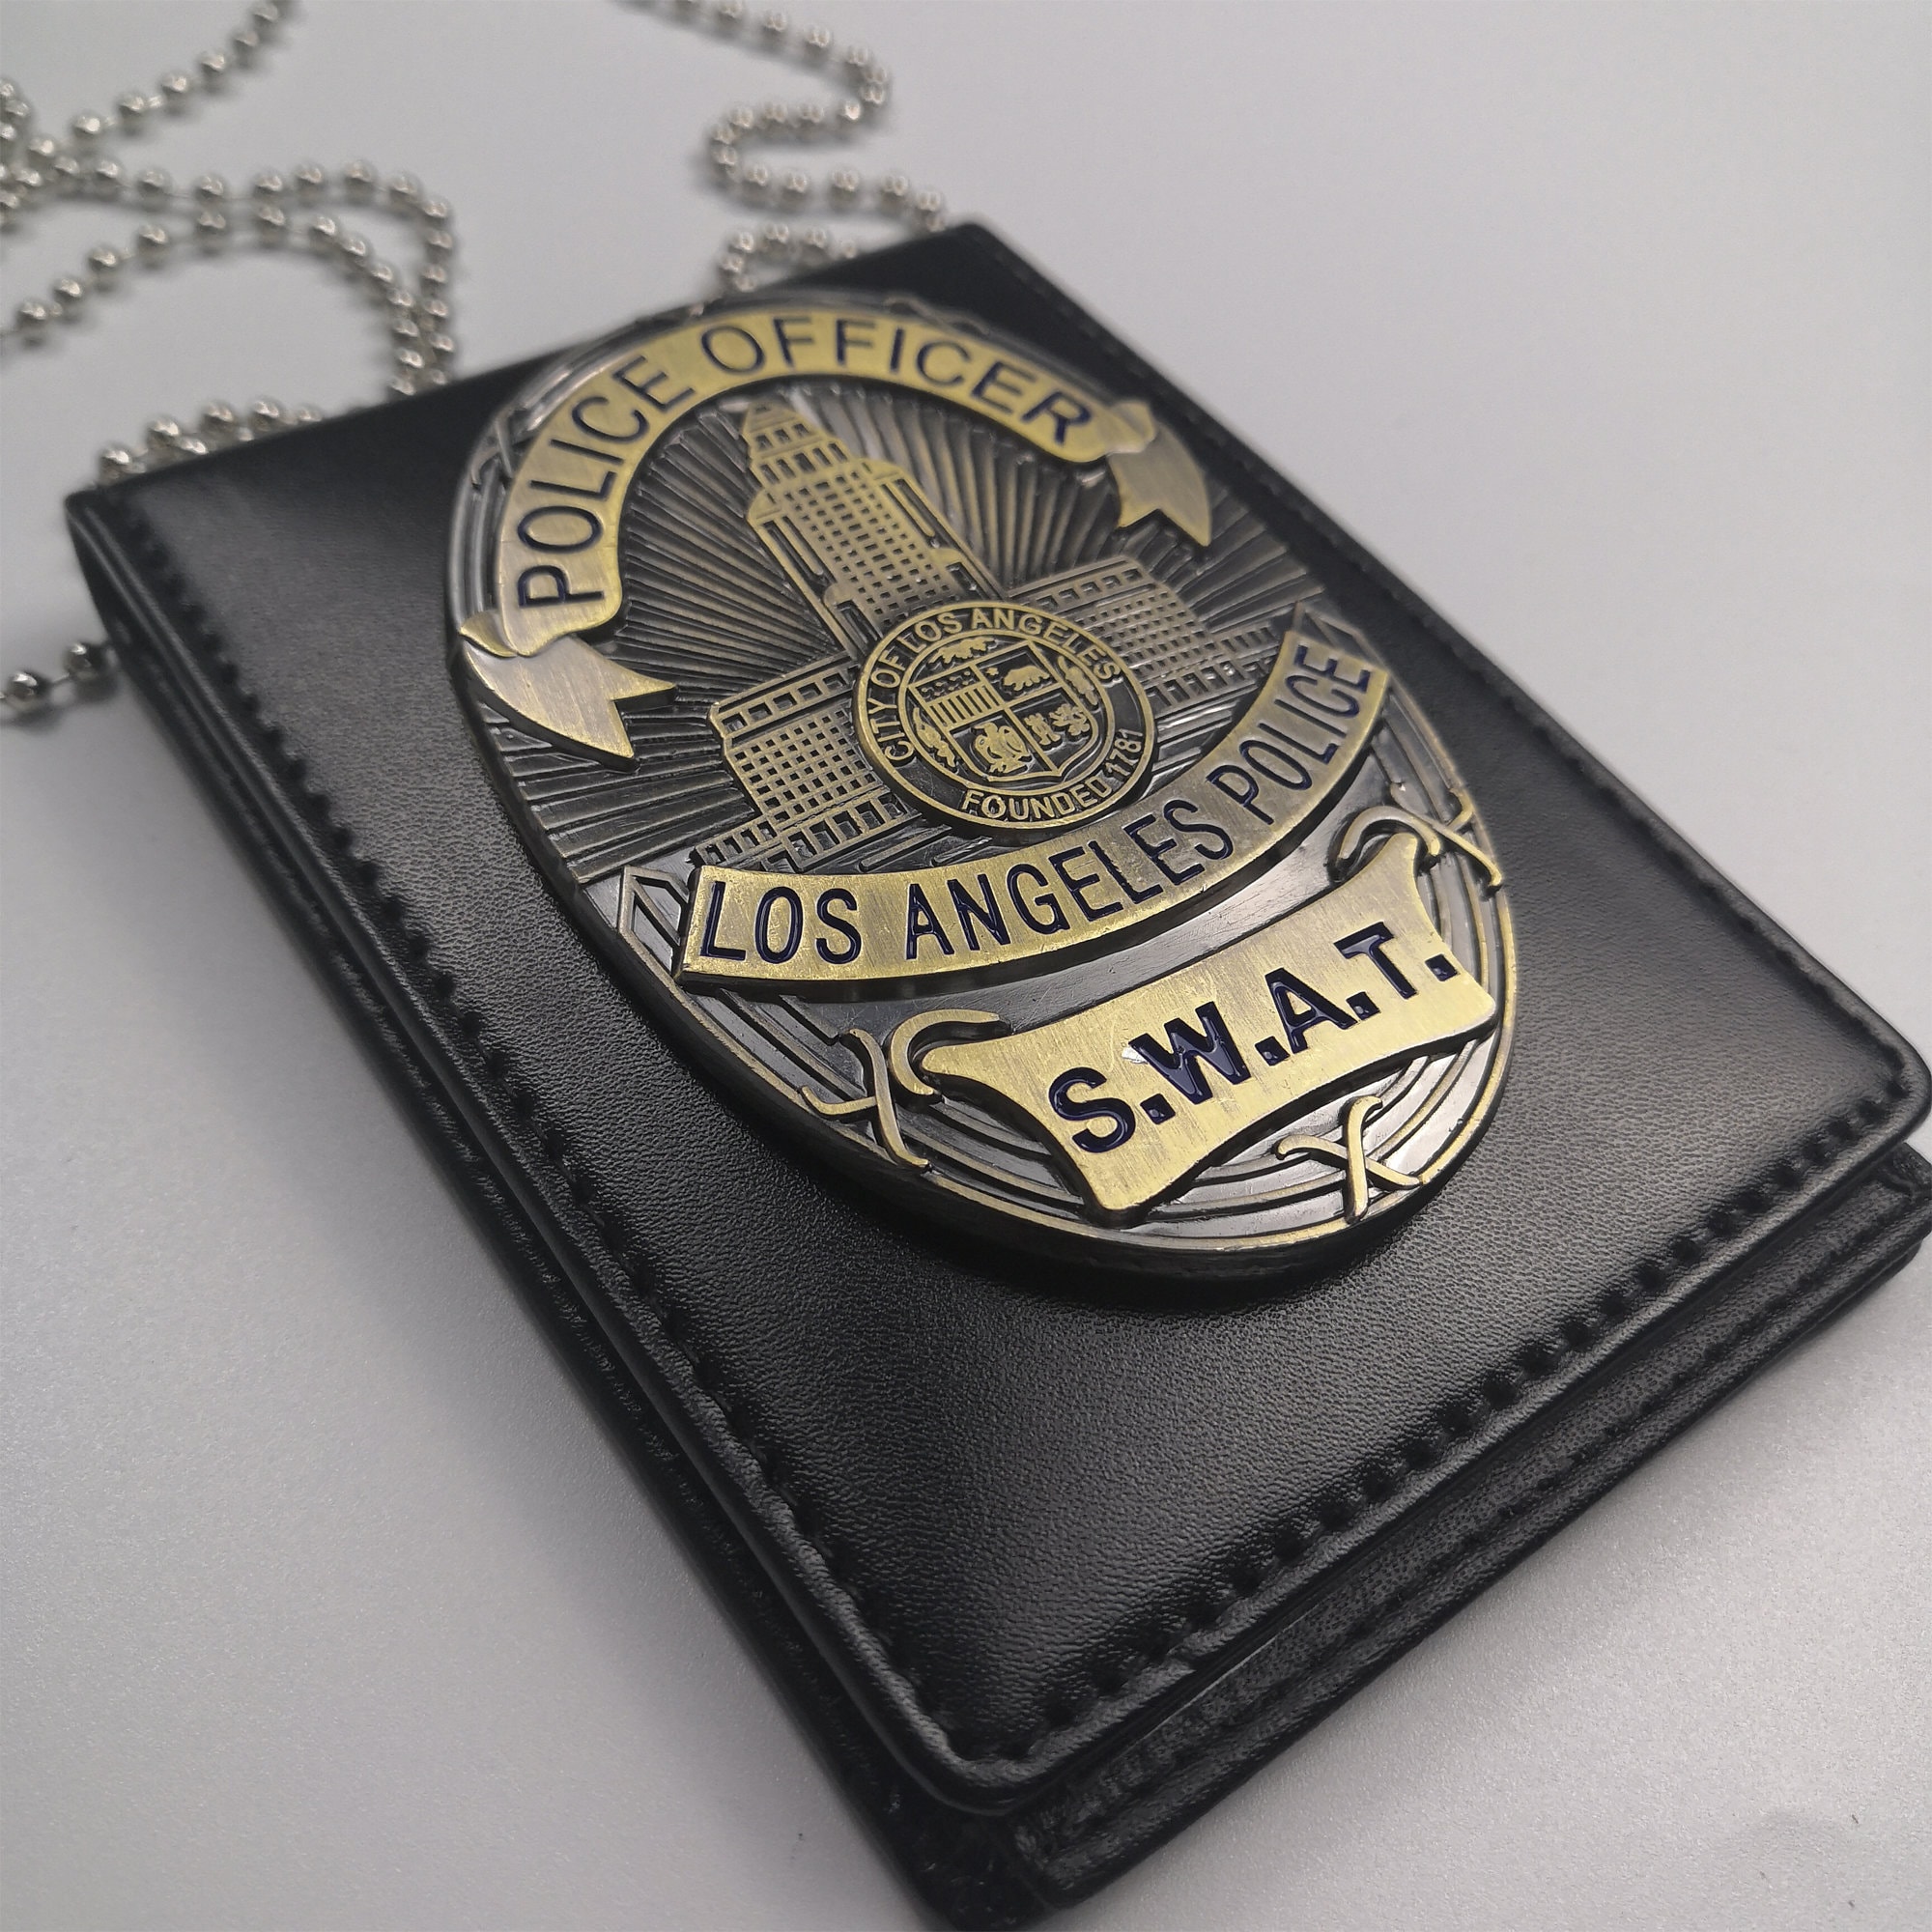 Circle Police Officer Badge Holder Necklace Style for Security, Sheriff, First Responders - Includes Chain and Badge Spacers